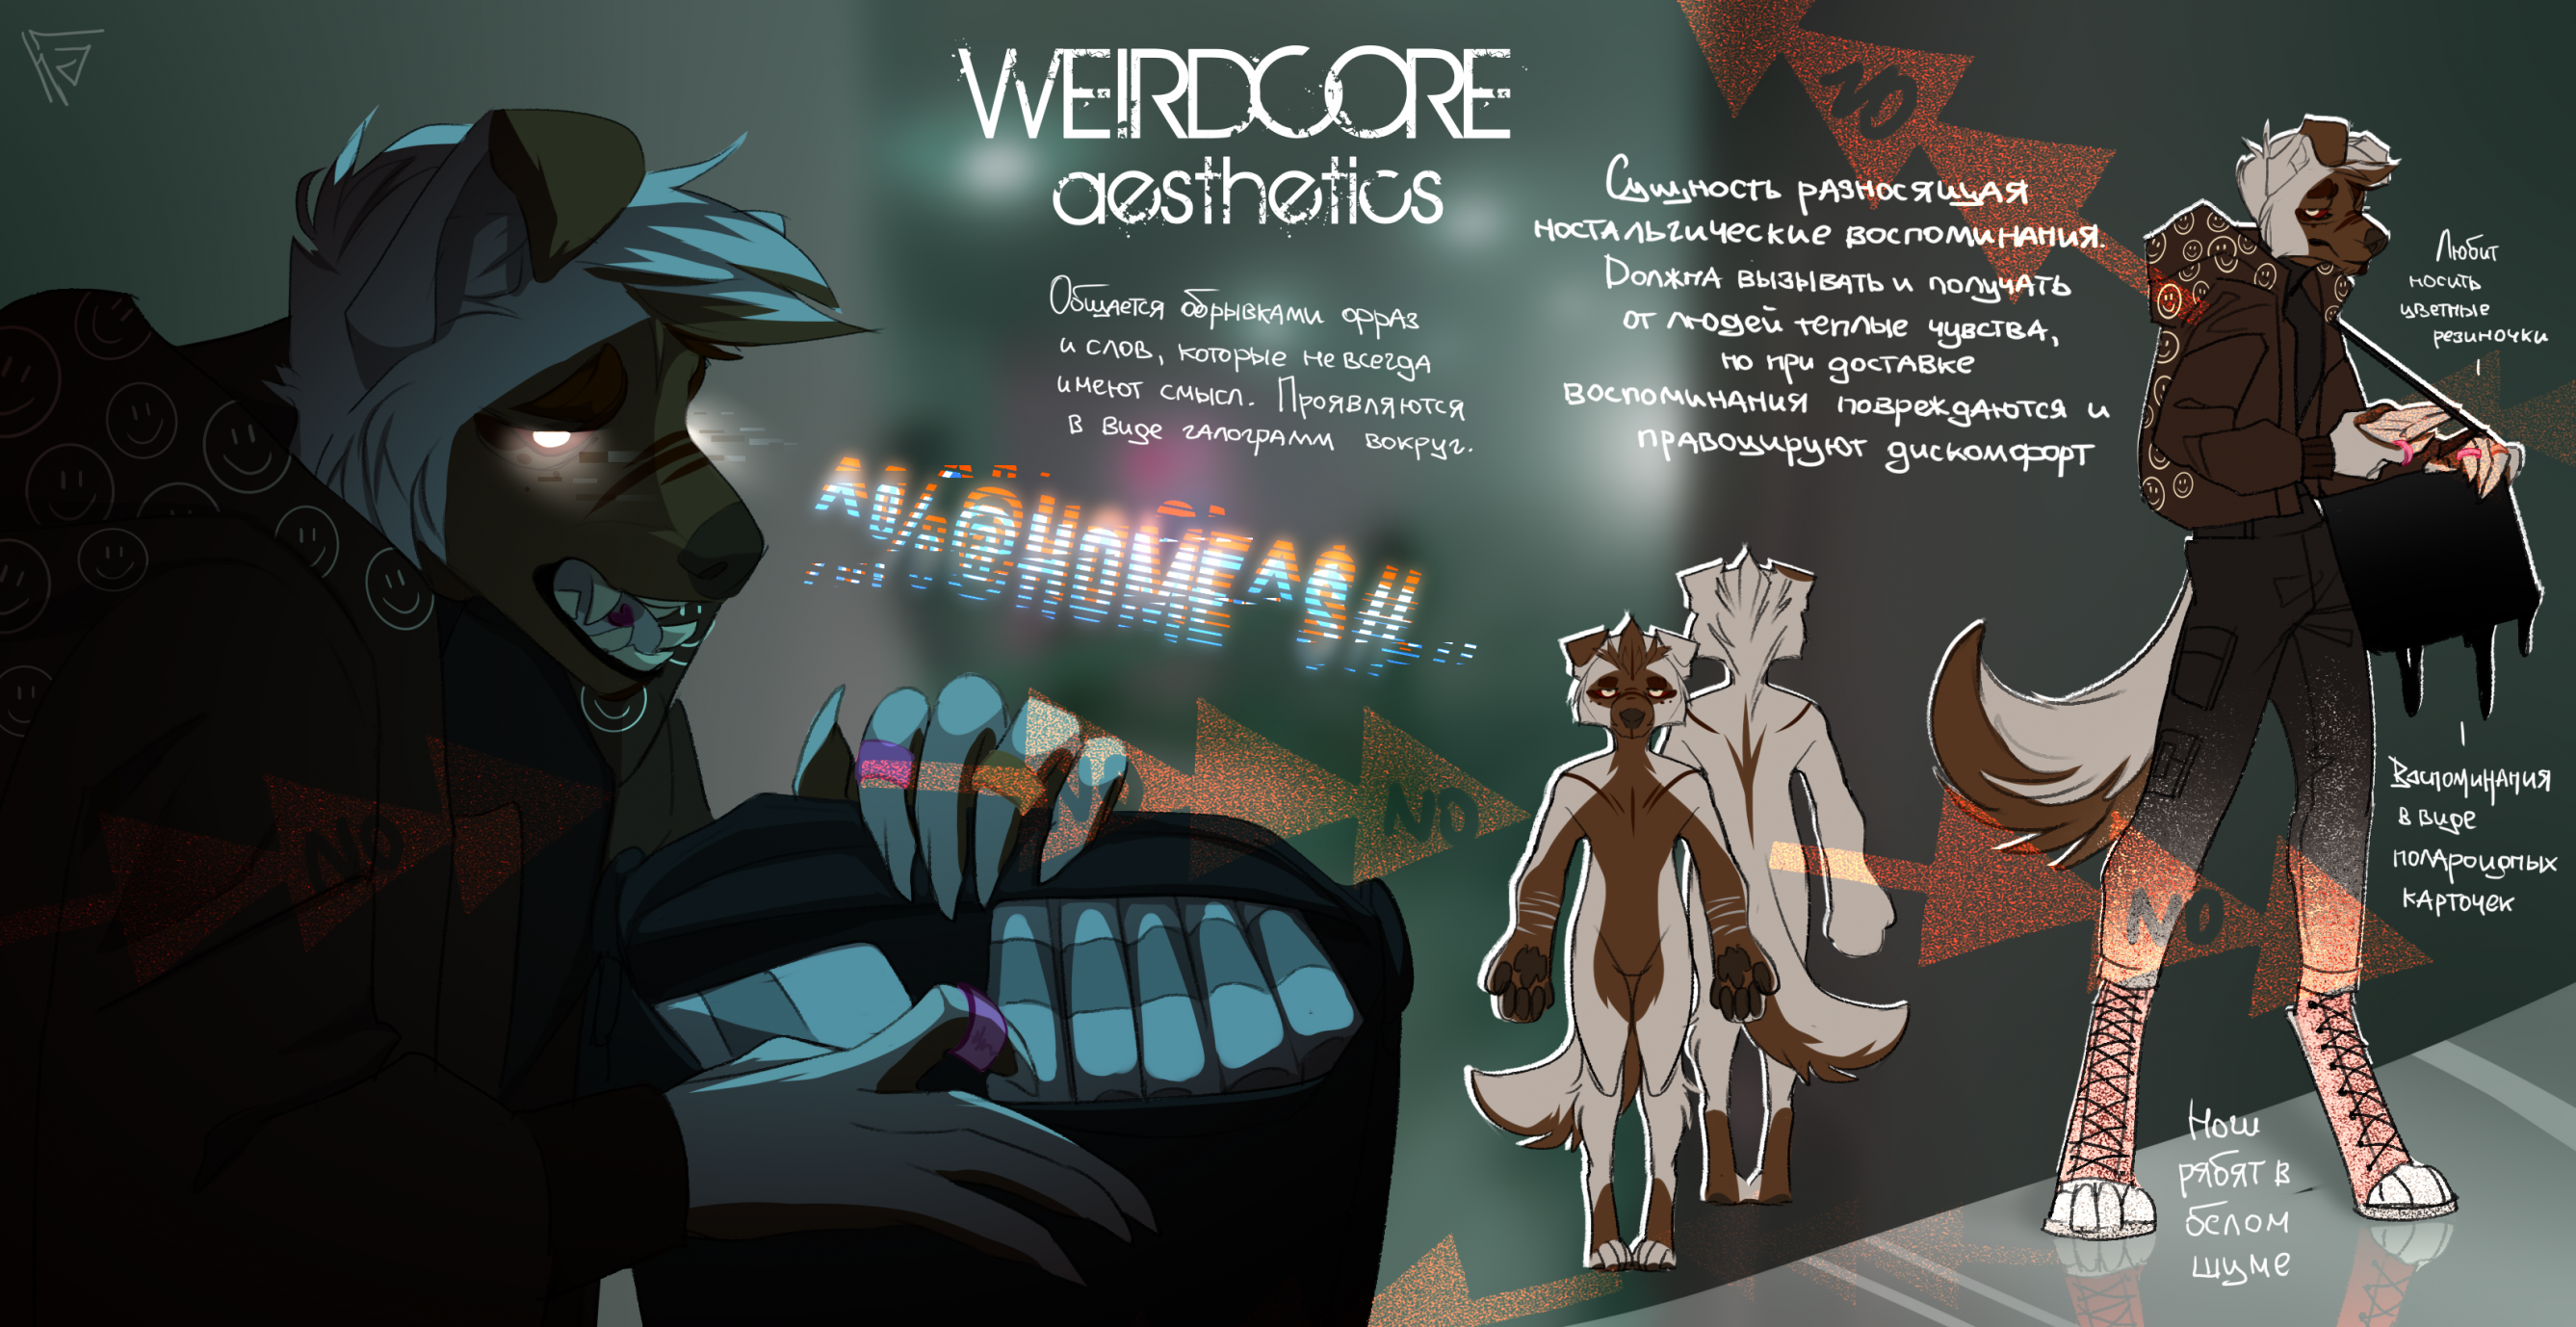 What is weirdcore? How is it changing aesthetics of outfits?